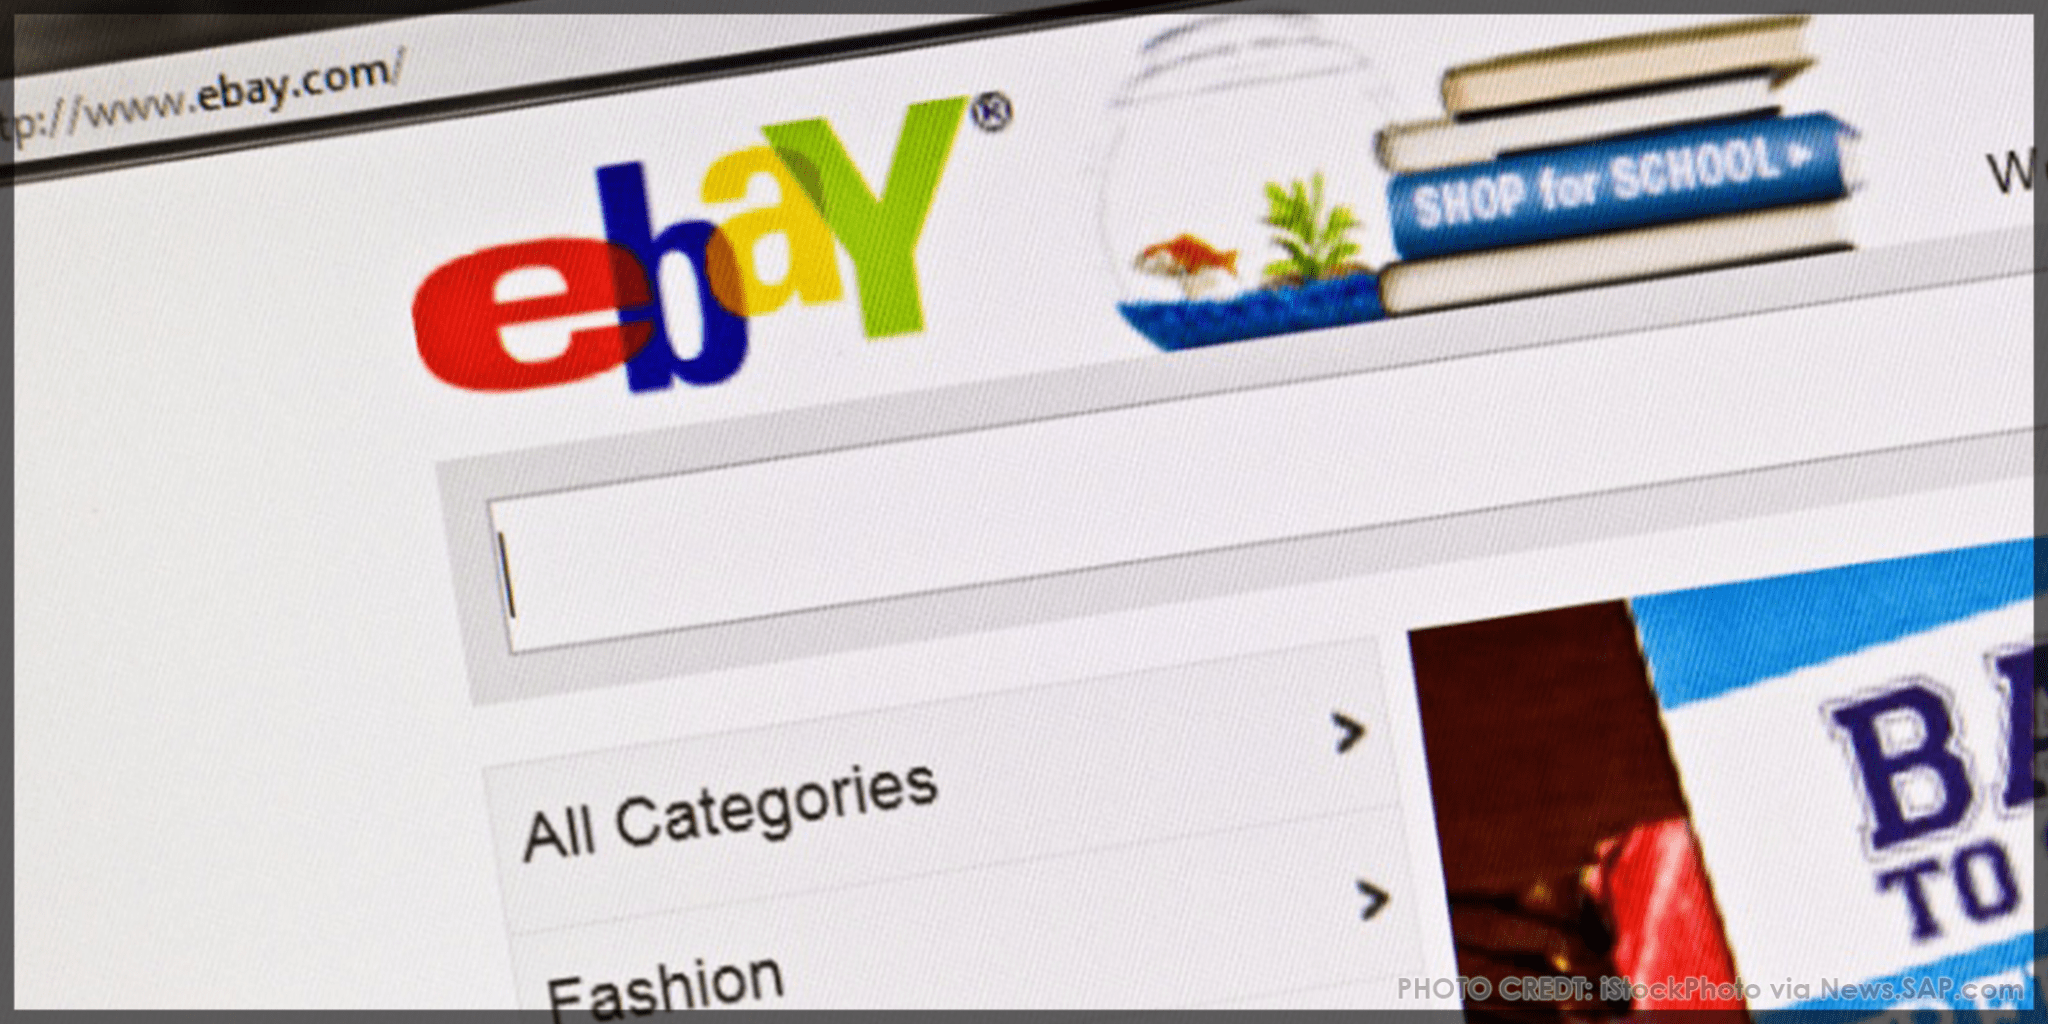 How eBay Uses Big Data and Machine Learning to Drive Business Value